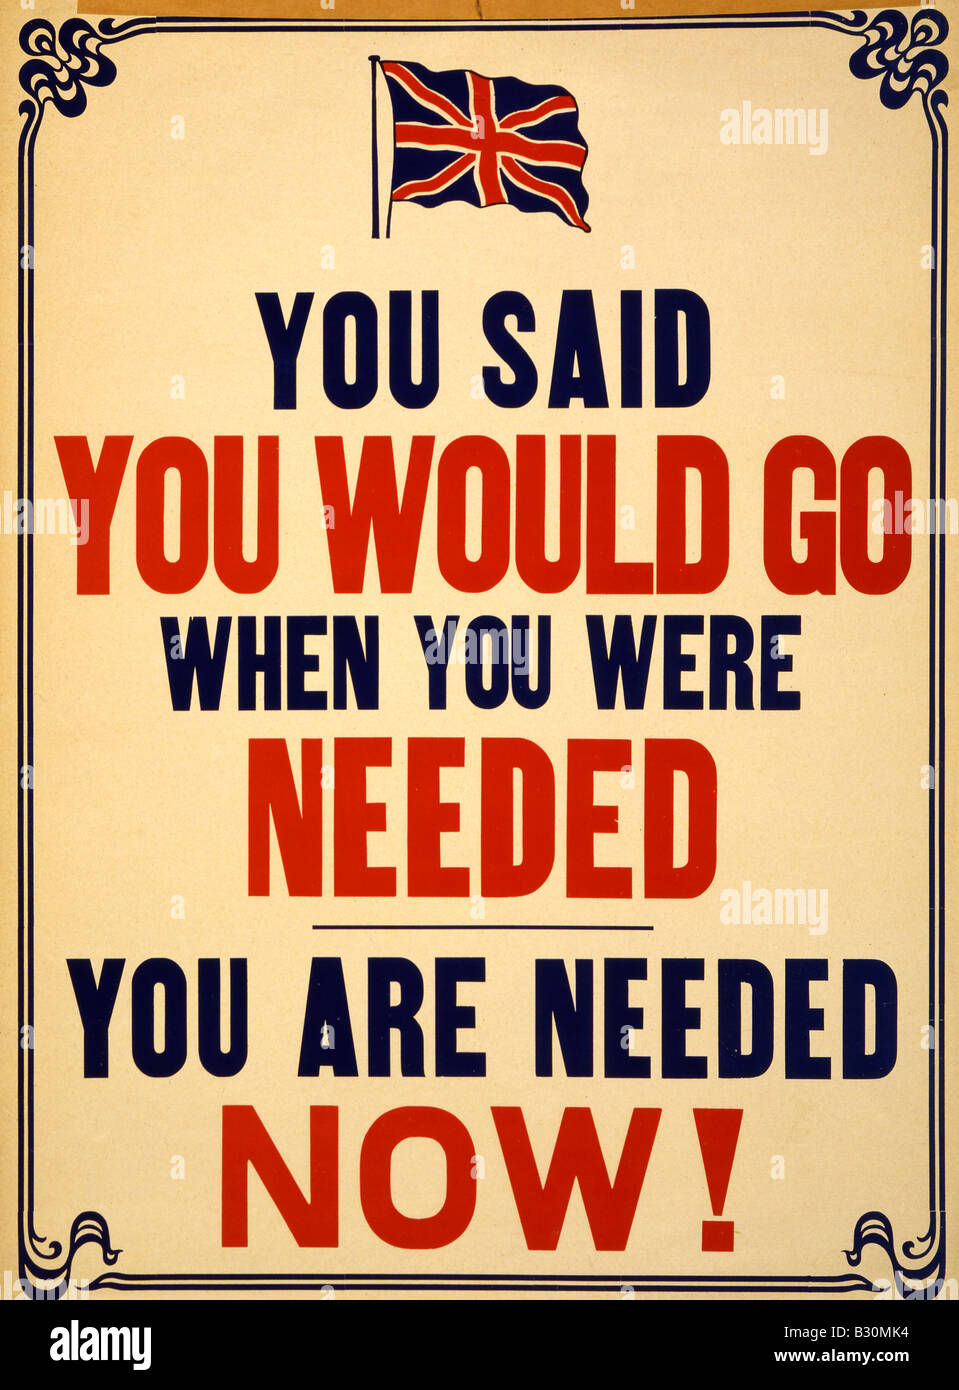 You said you would go when you were needed. You are needed now! World War I vintage UK poster trying to get recruits Stock Photo